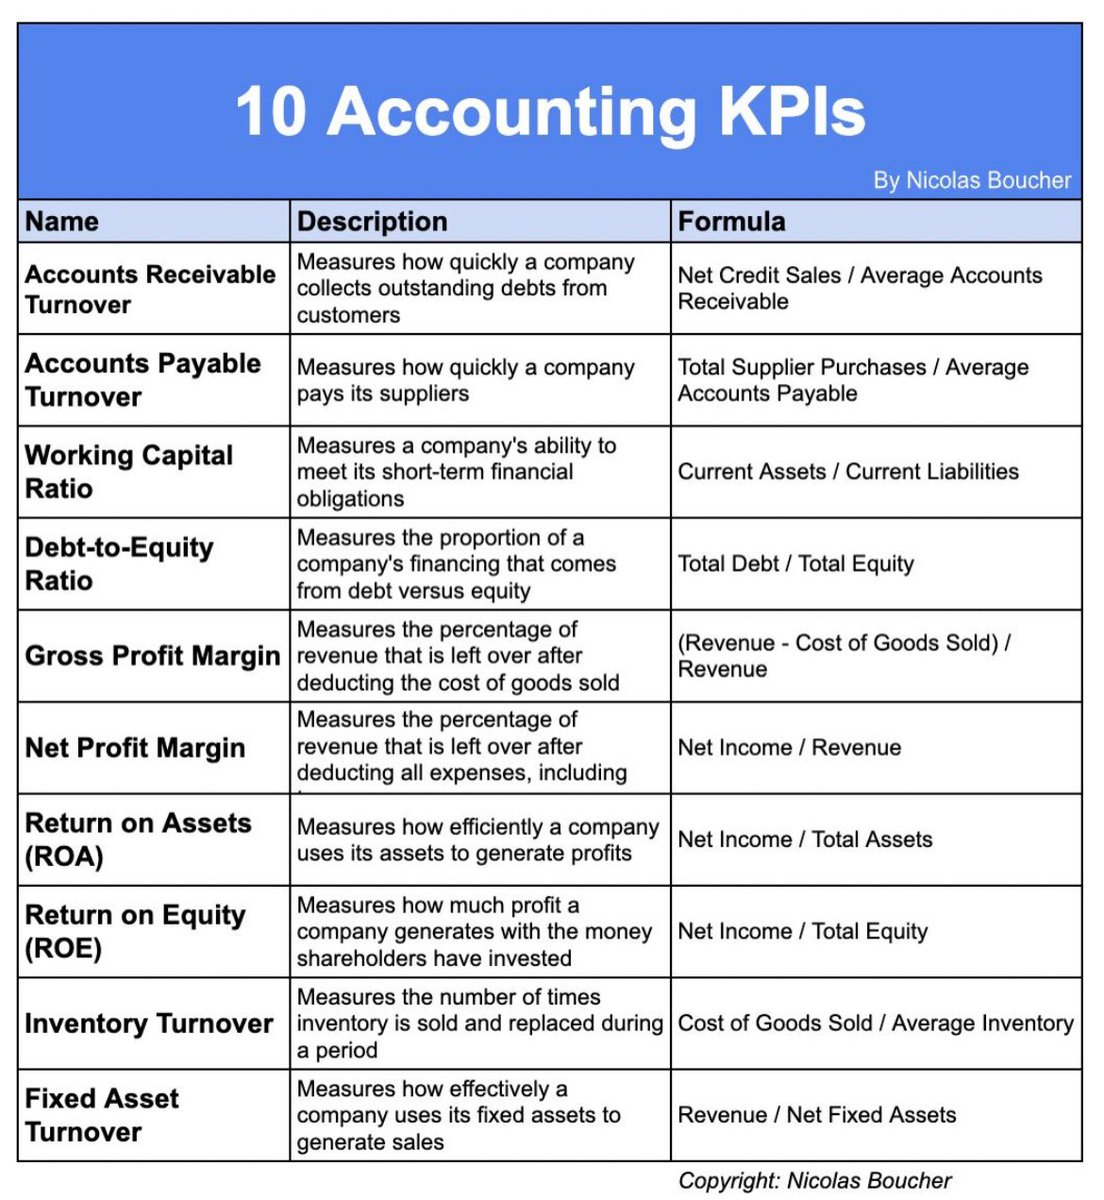 The best KPIs for accounting.

Did I miss something?